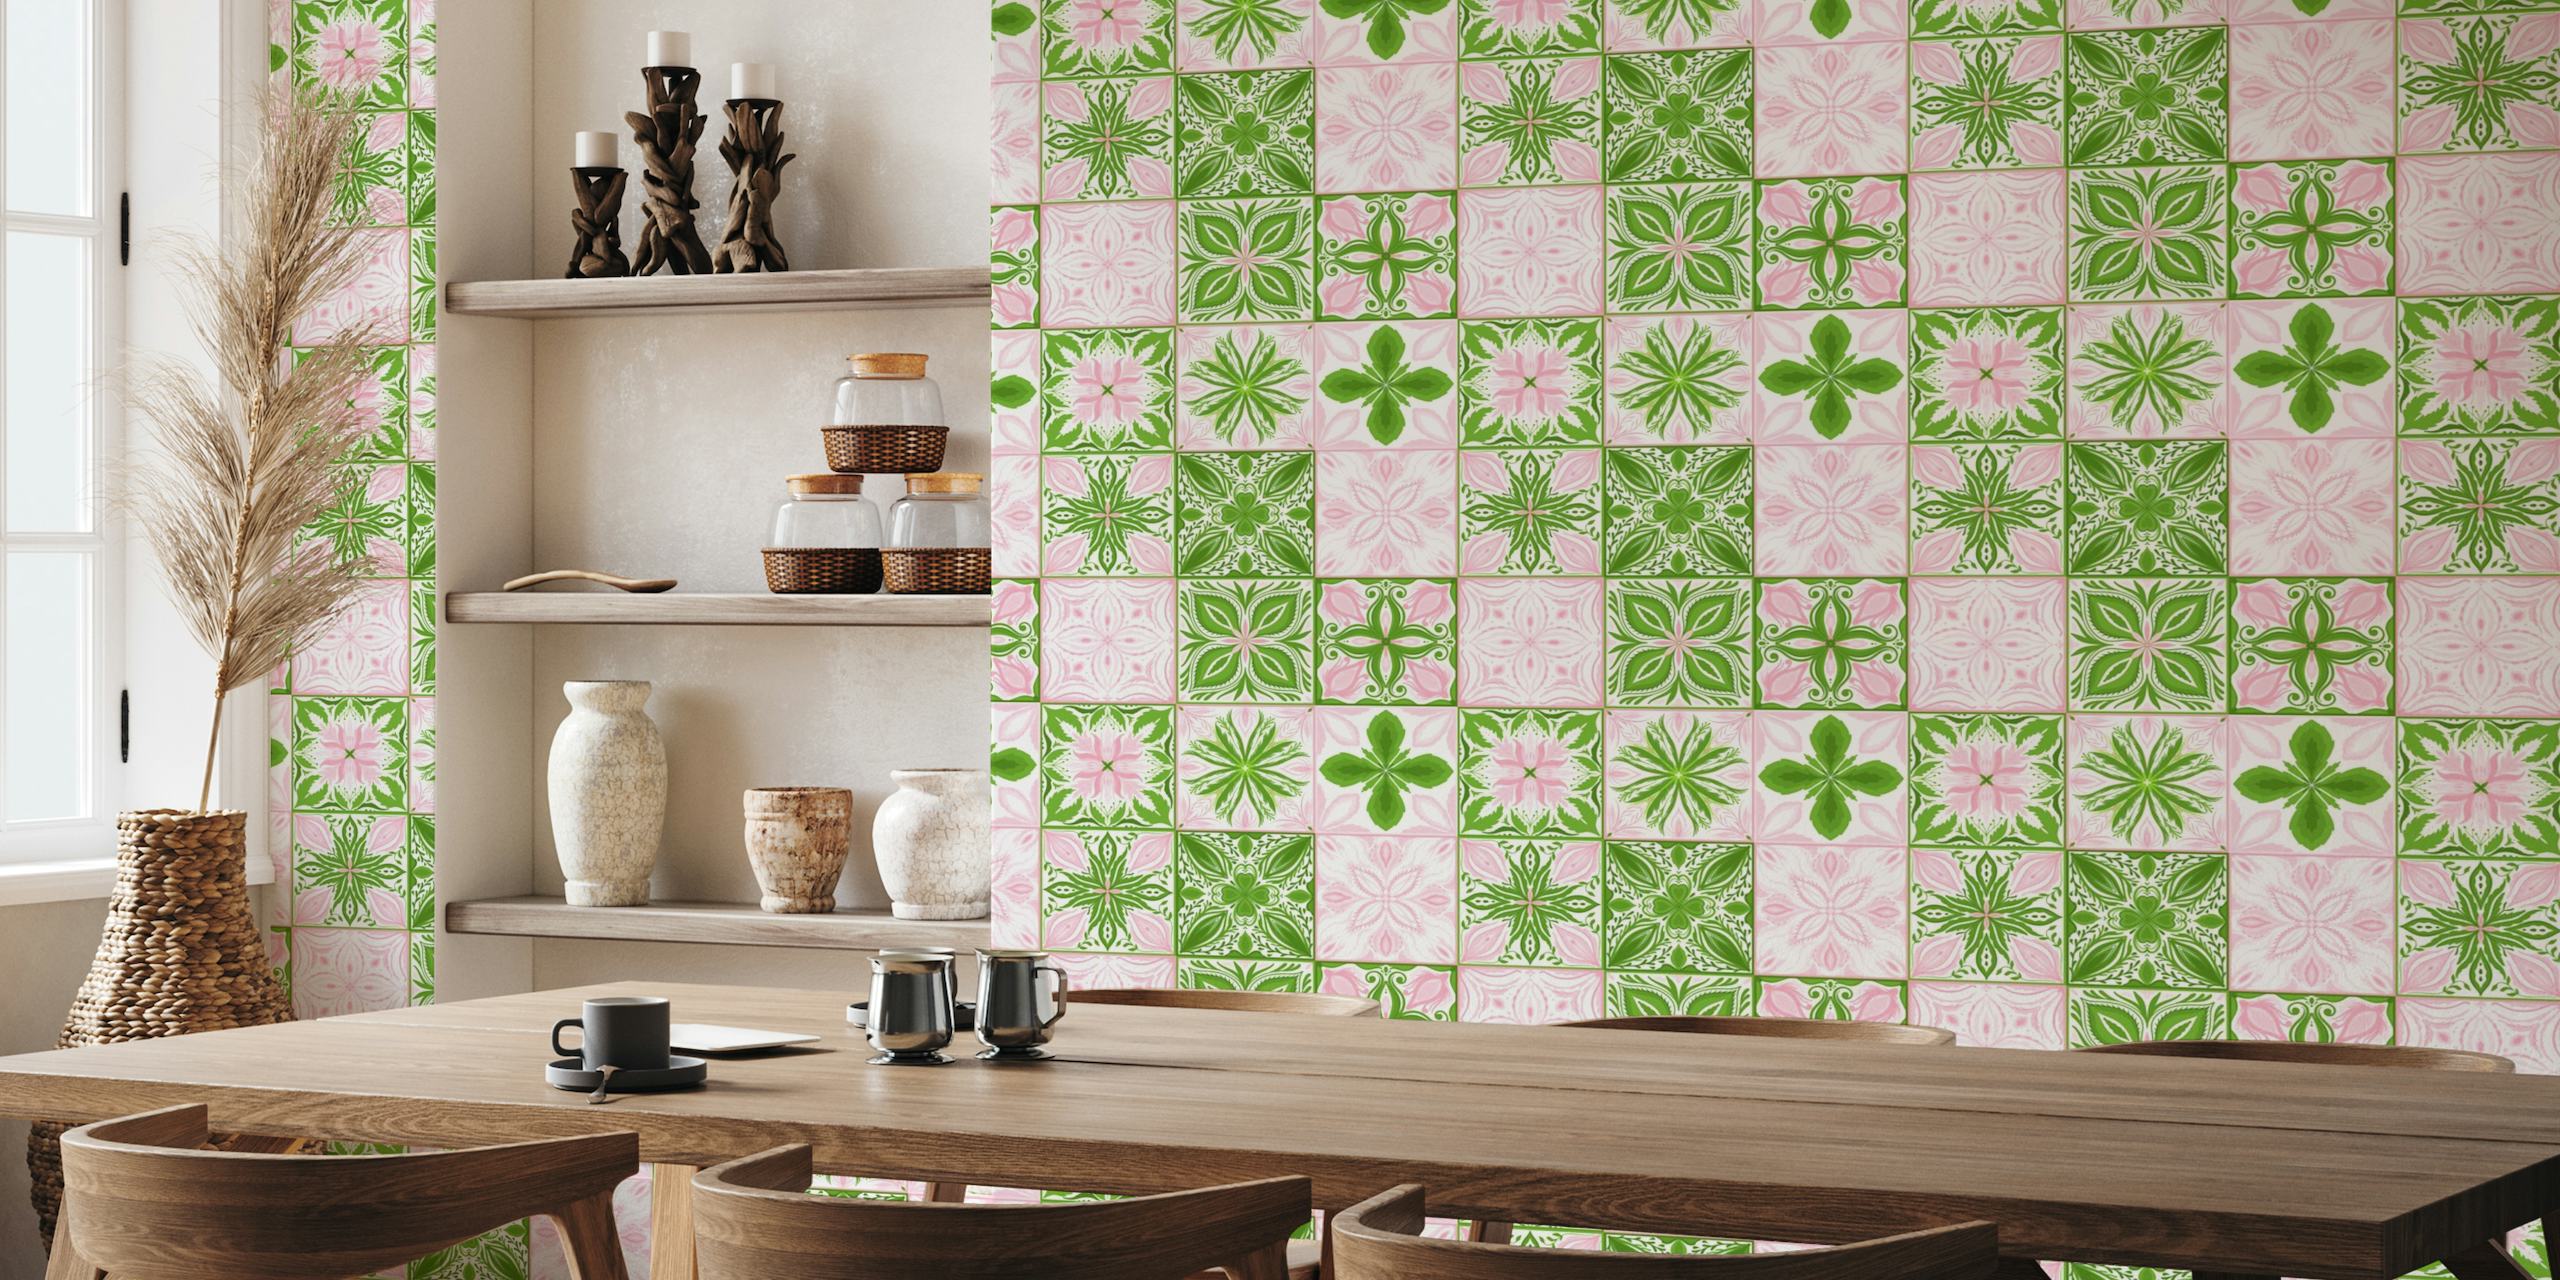 Ornate tiles in pink and green wallpaper